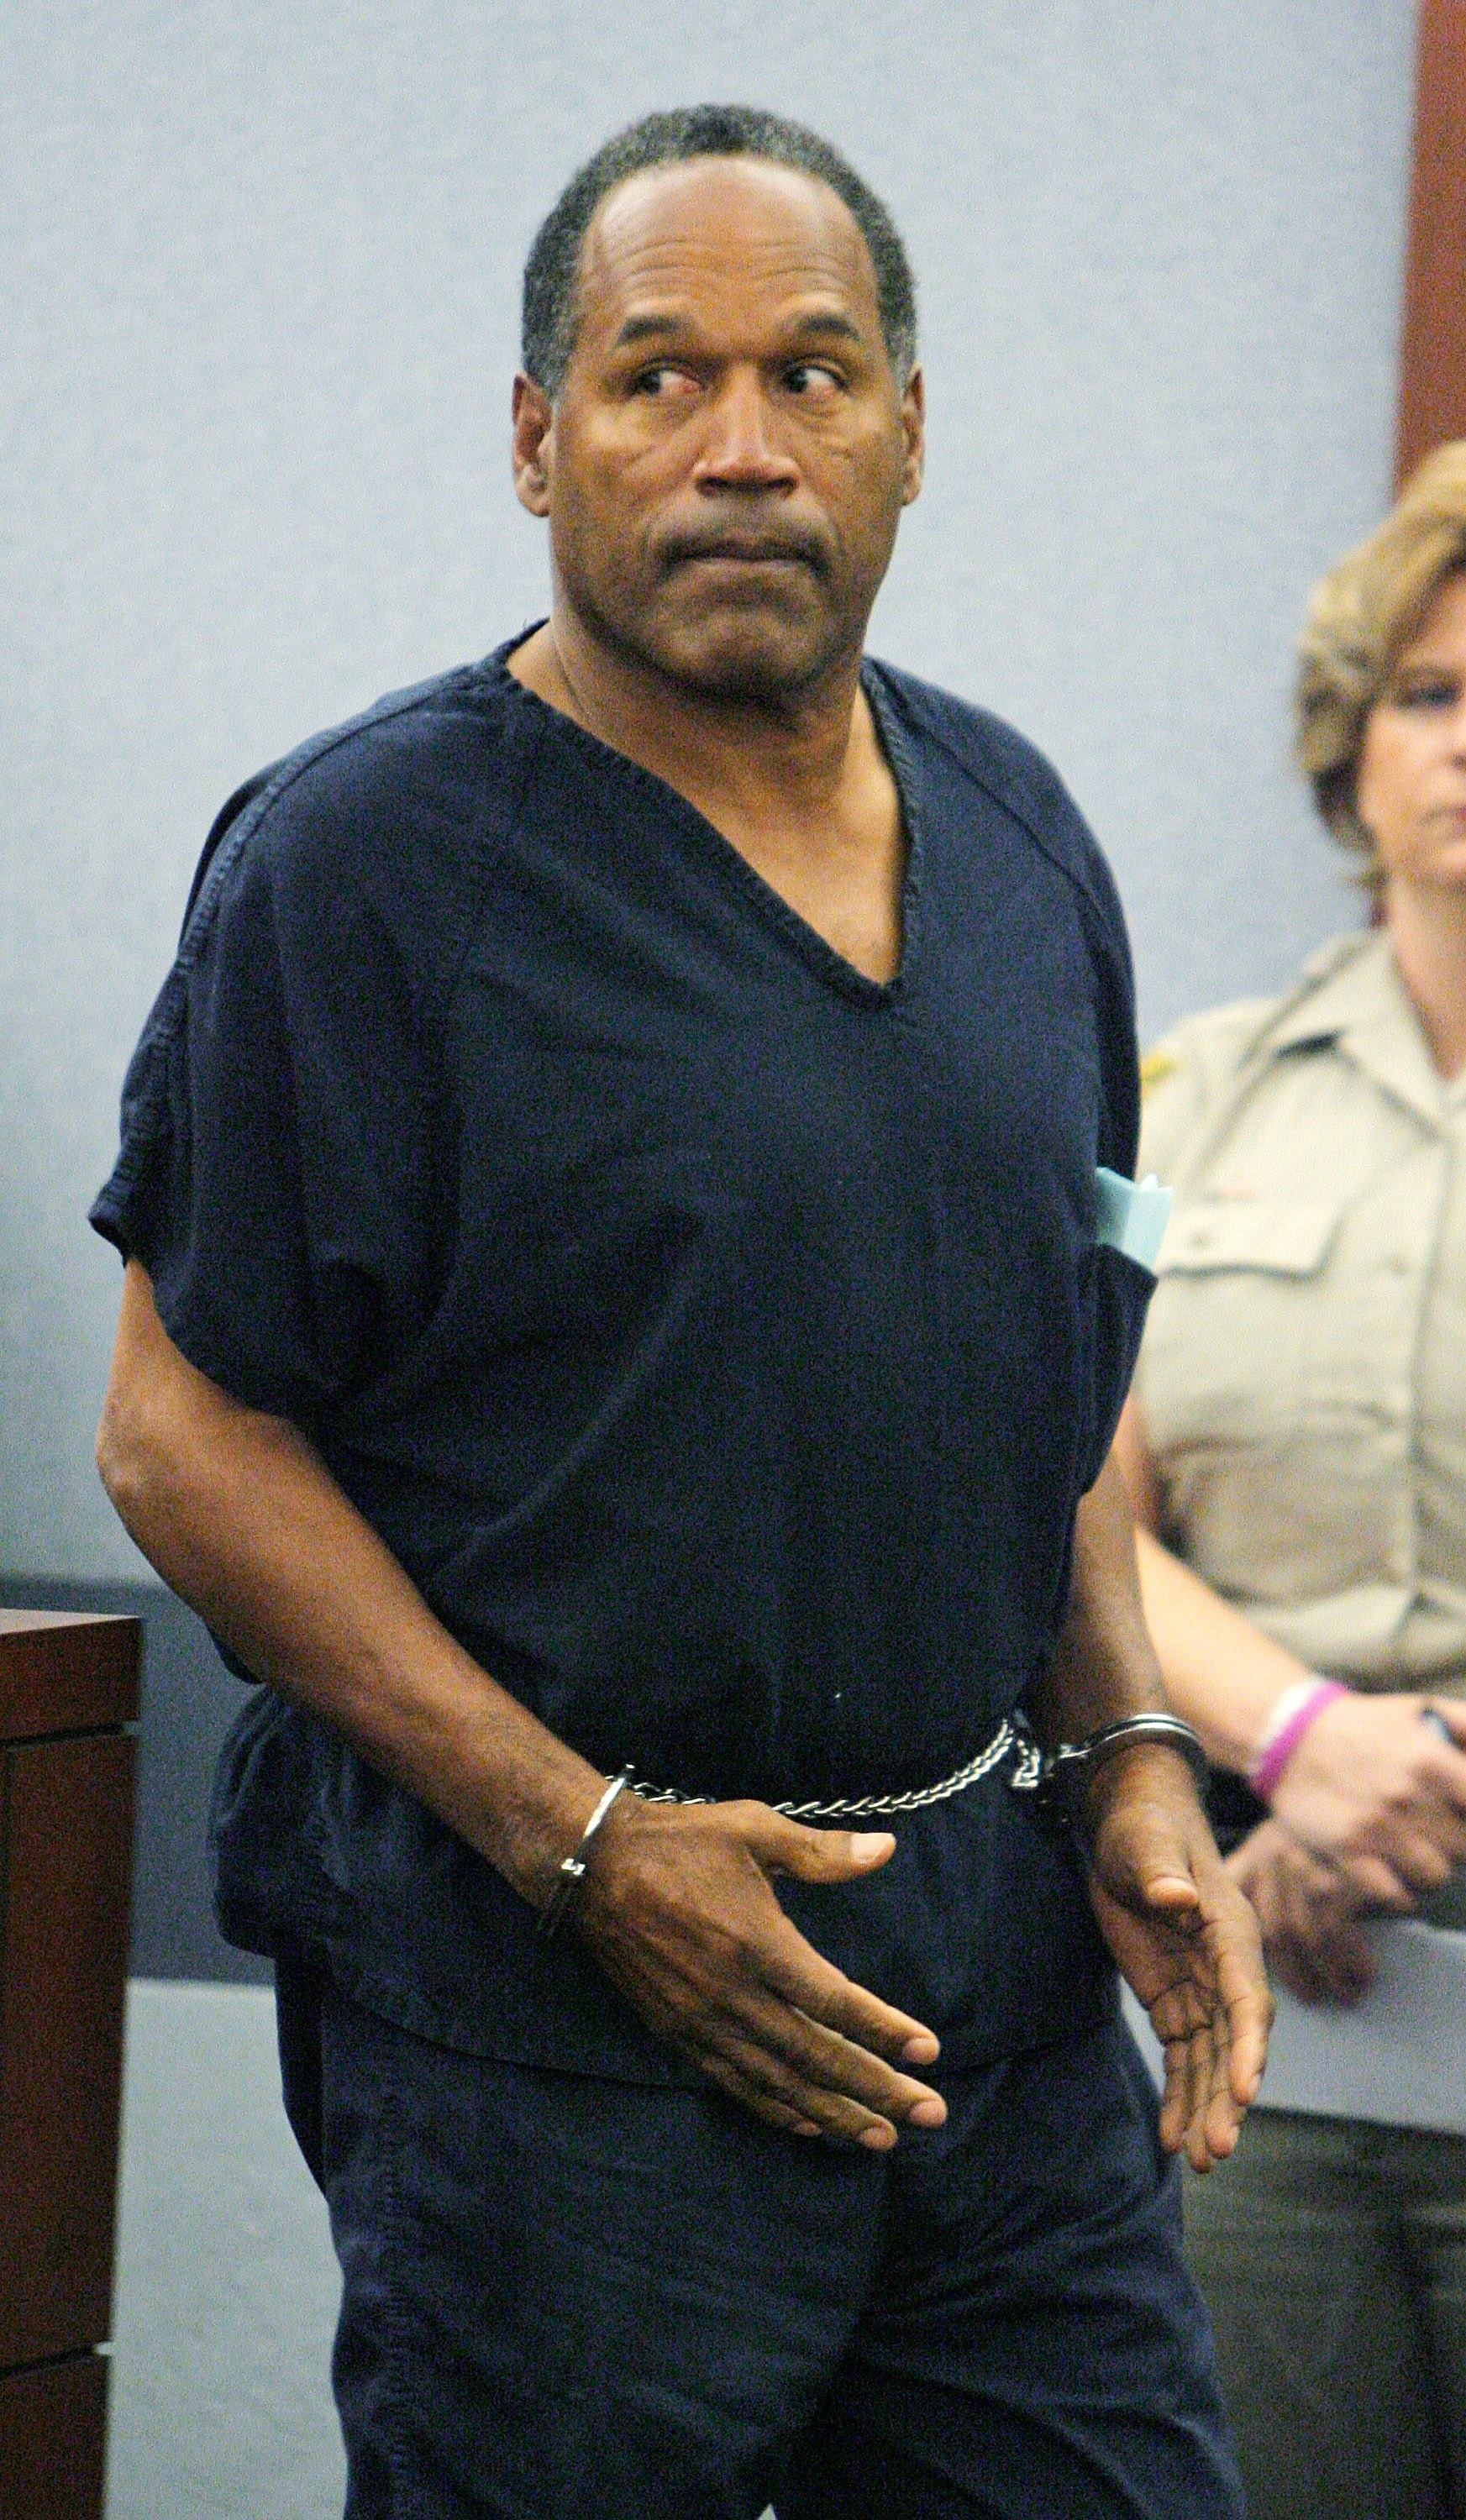 O.J. Simpson Attends Bail Hearing On Robbery Charges